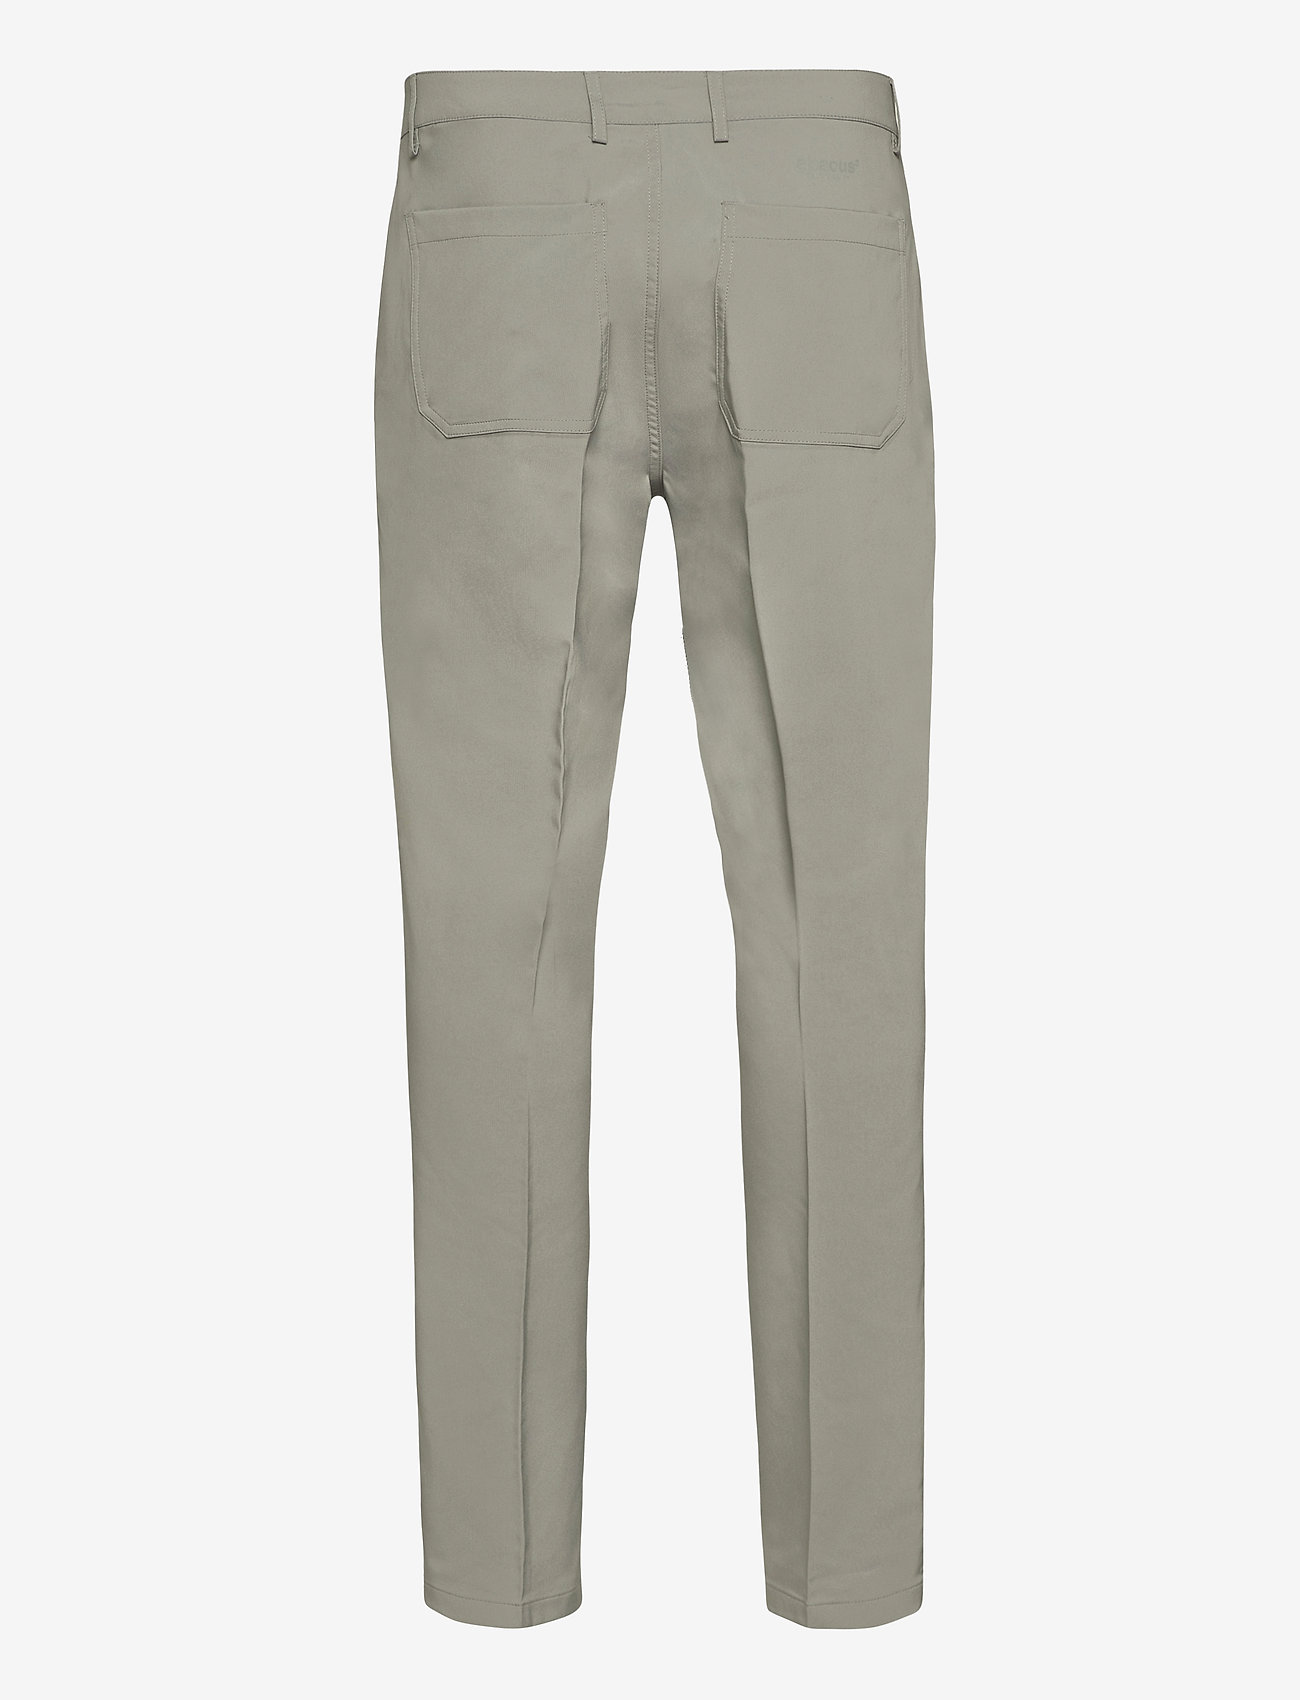 Abacus - Mens Cleek stretch trousers - golf pants - grey - 1